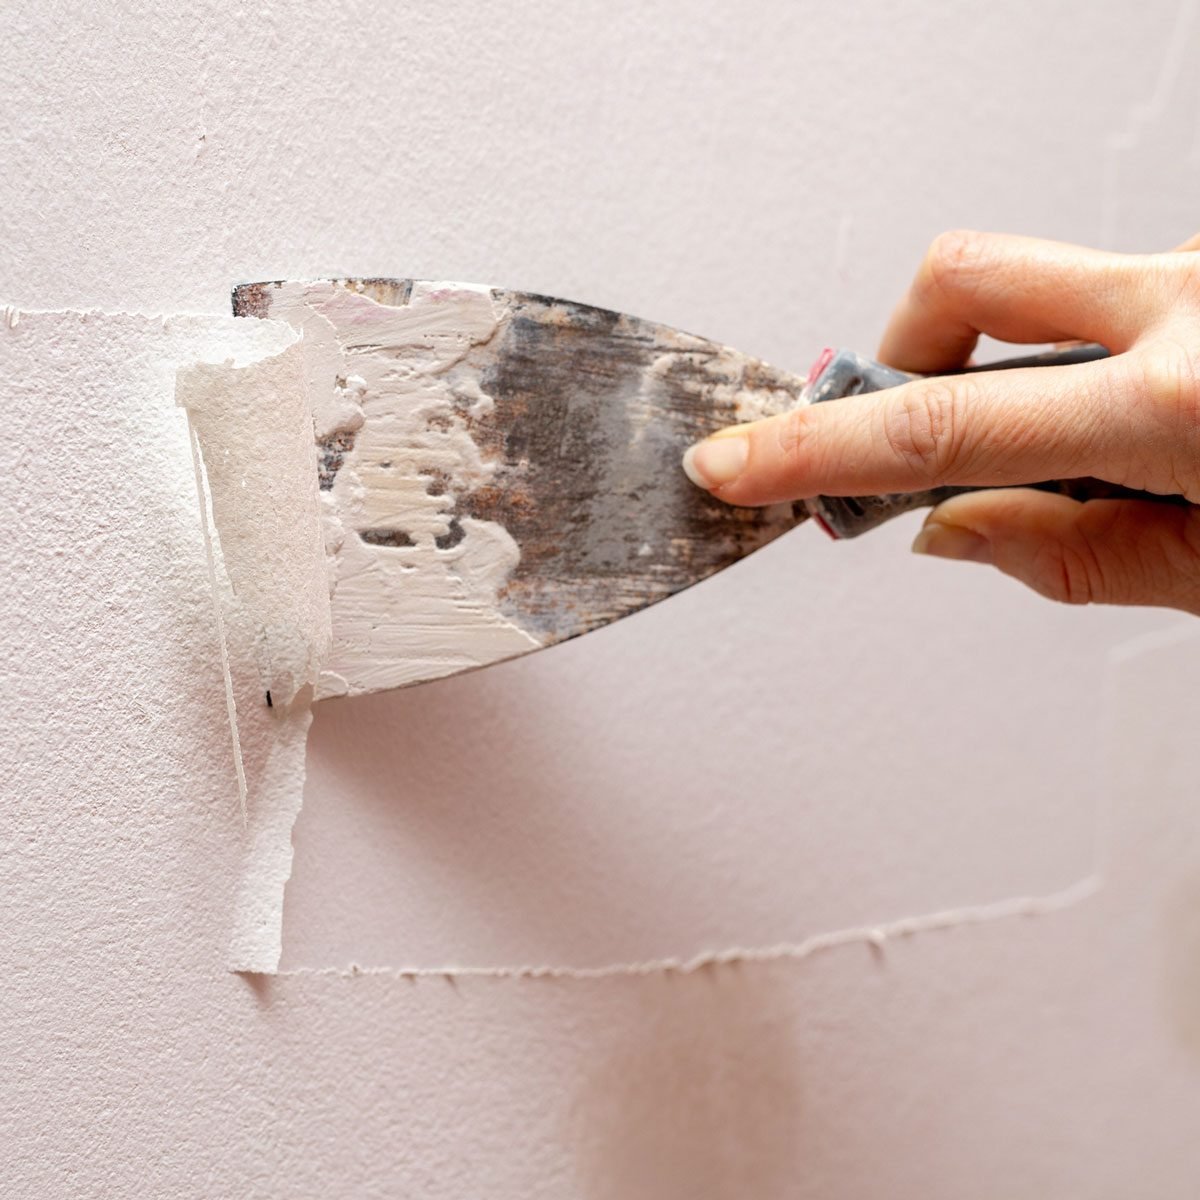 How To Remove Paint From Walls: Effortless Tips & Tricks